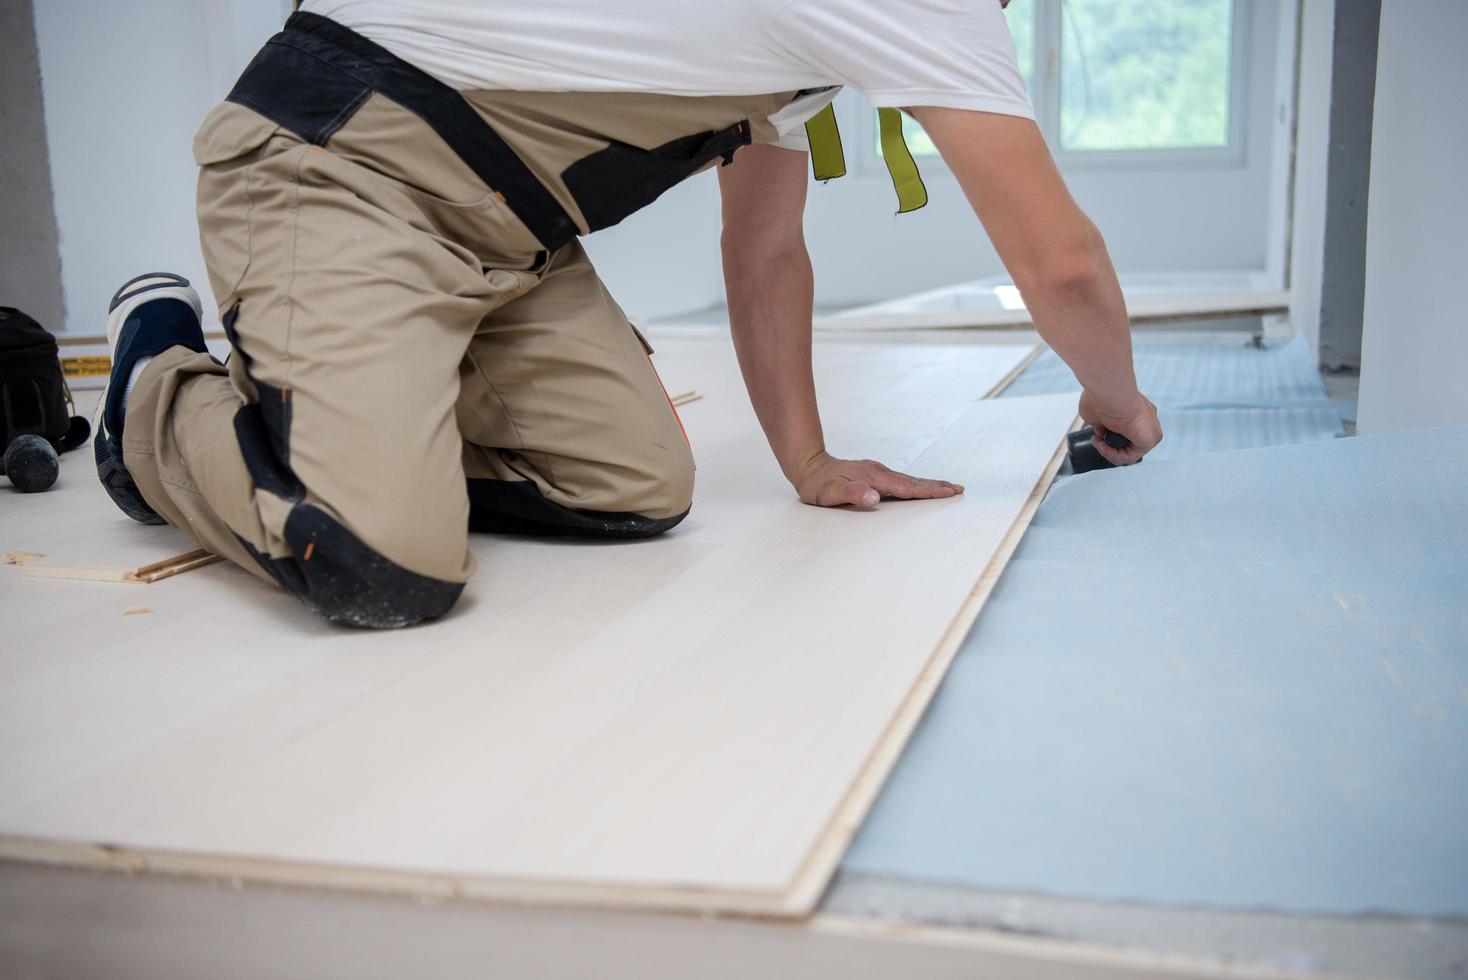 Professional Worker Installing New Laminated Wooden Floor photo